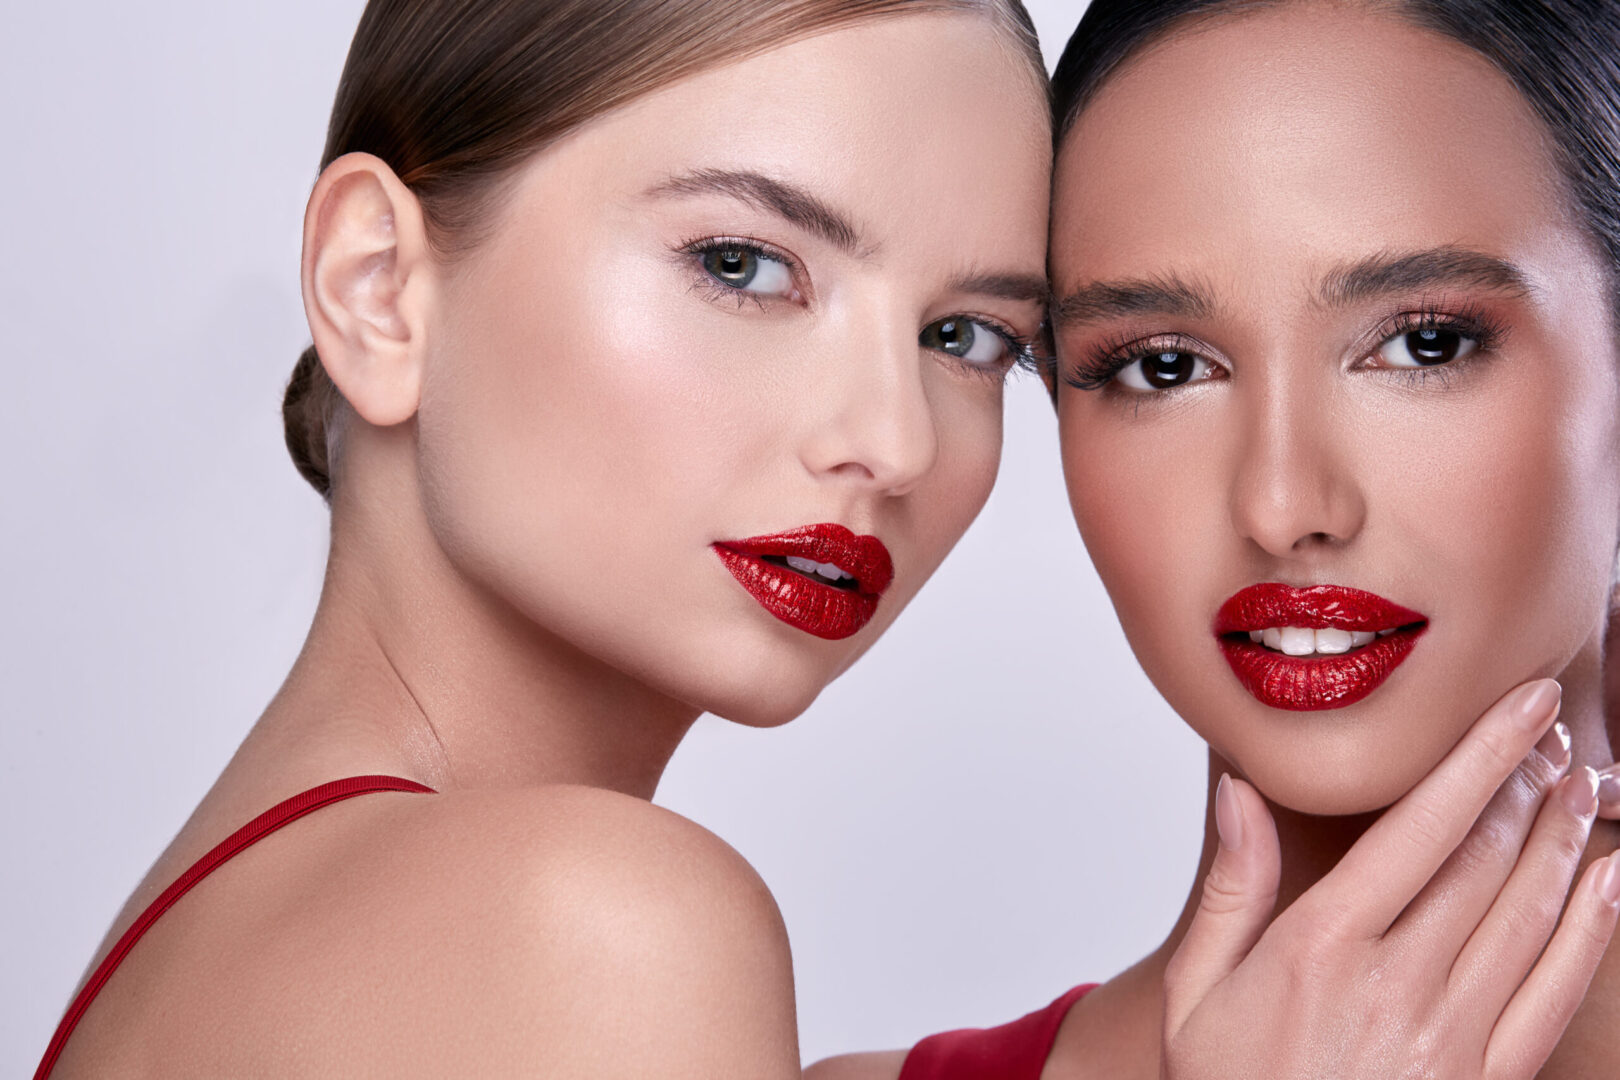 Two models wearing red lipstick